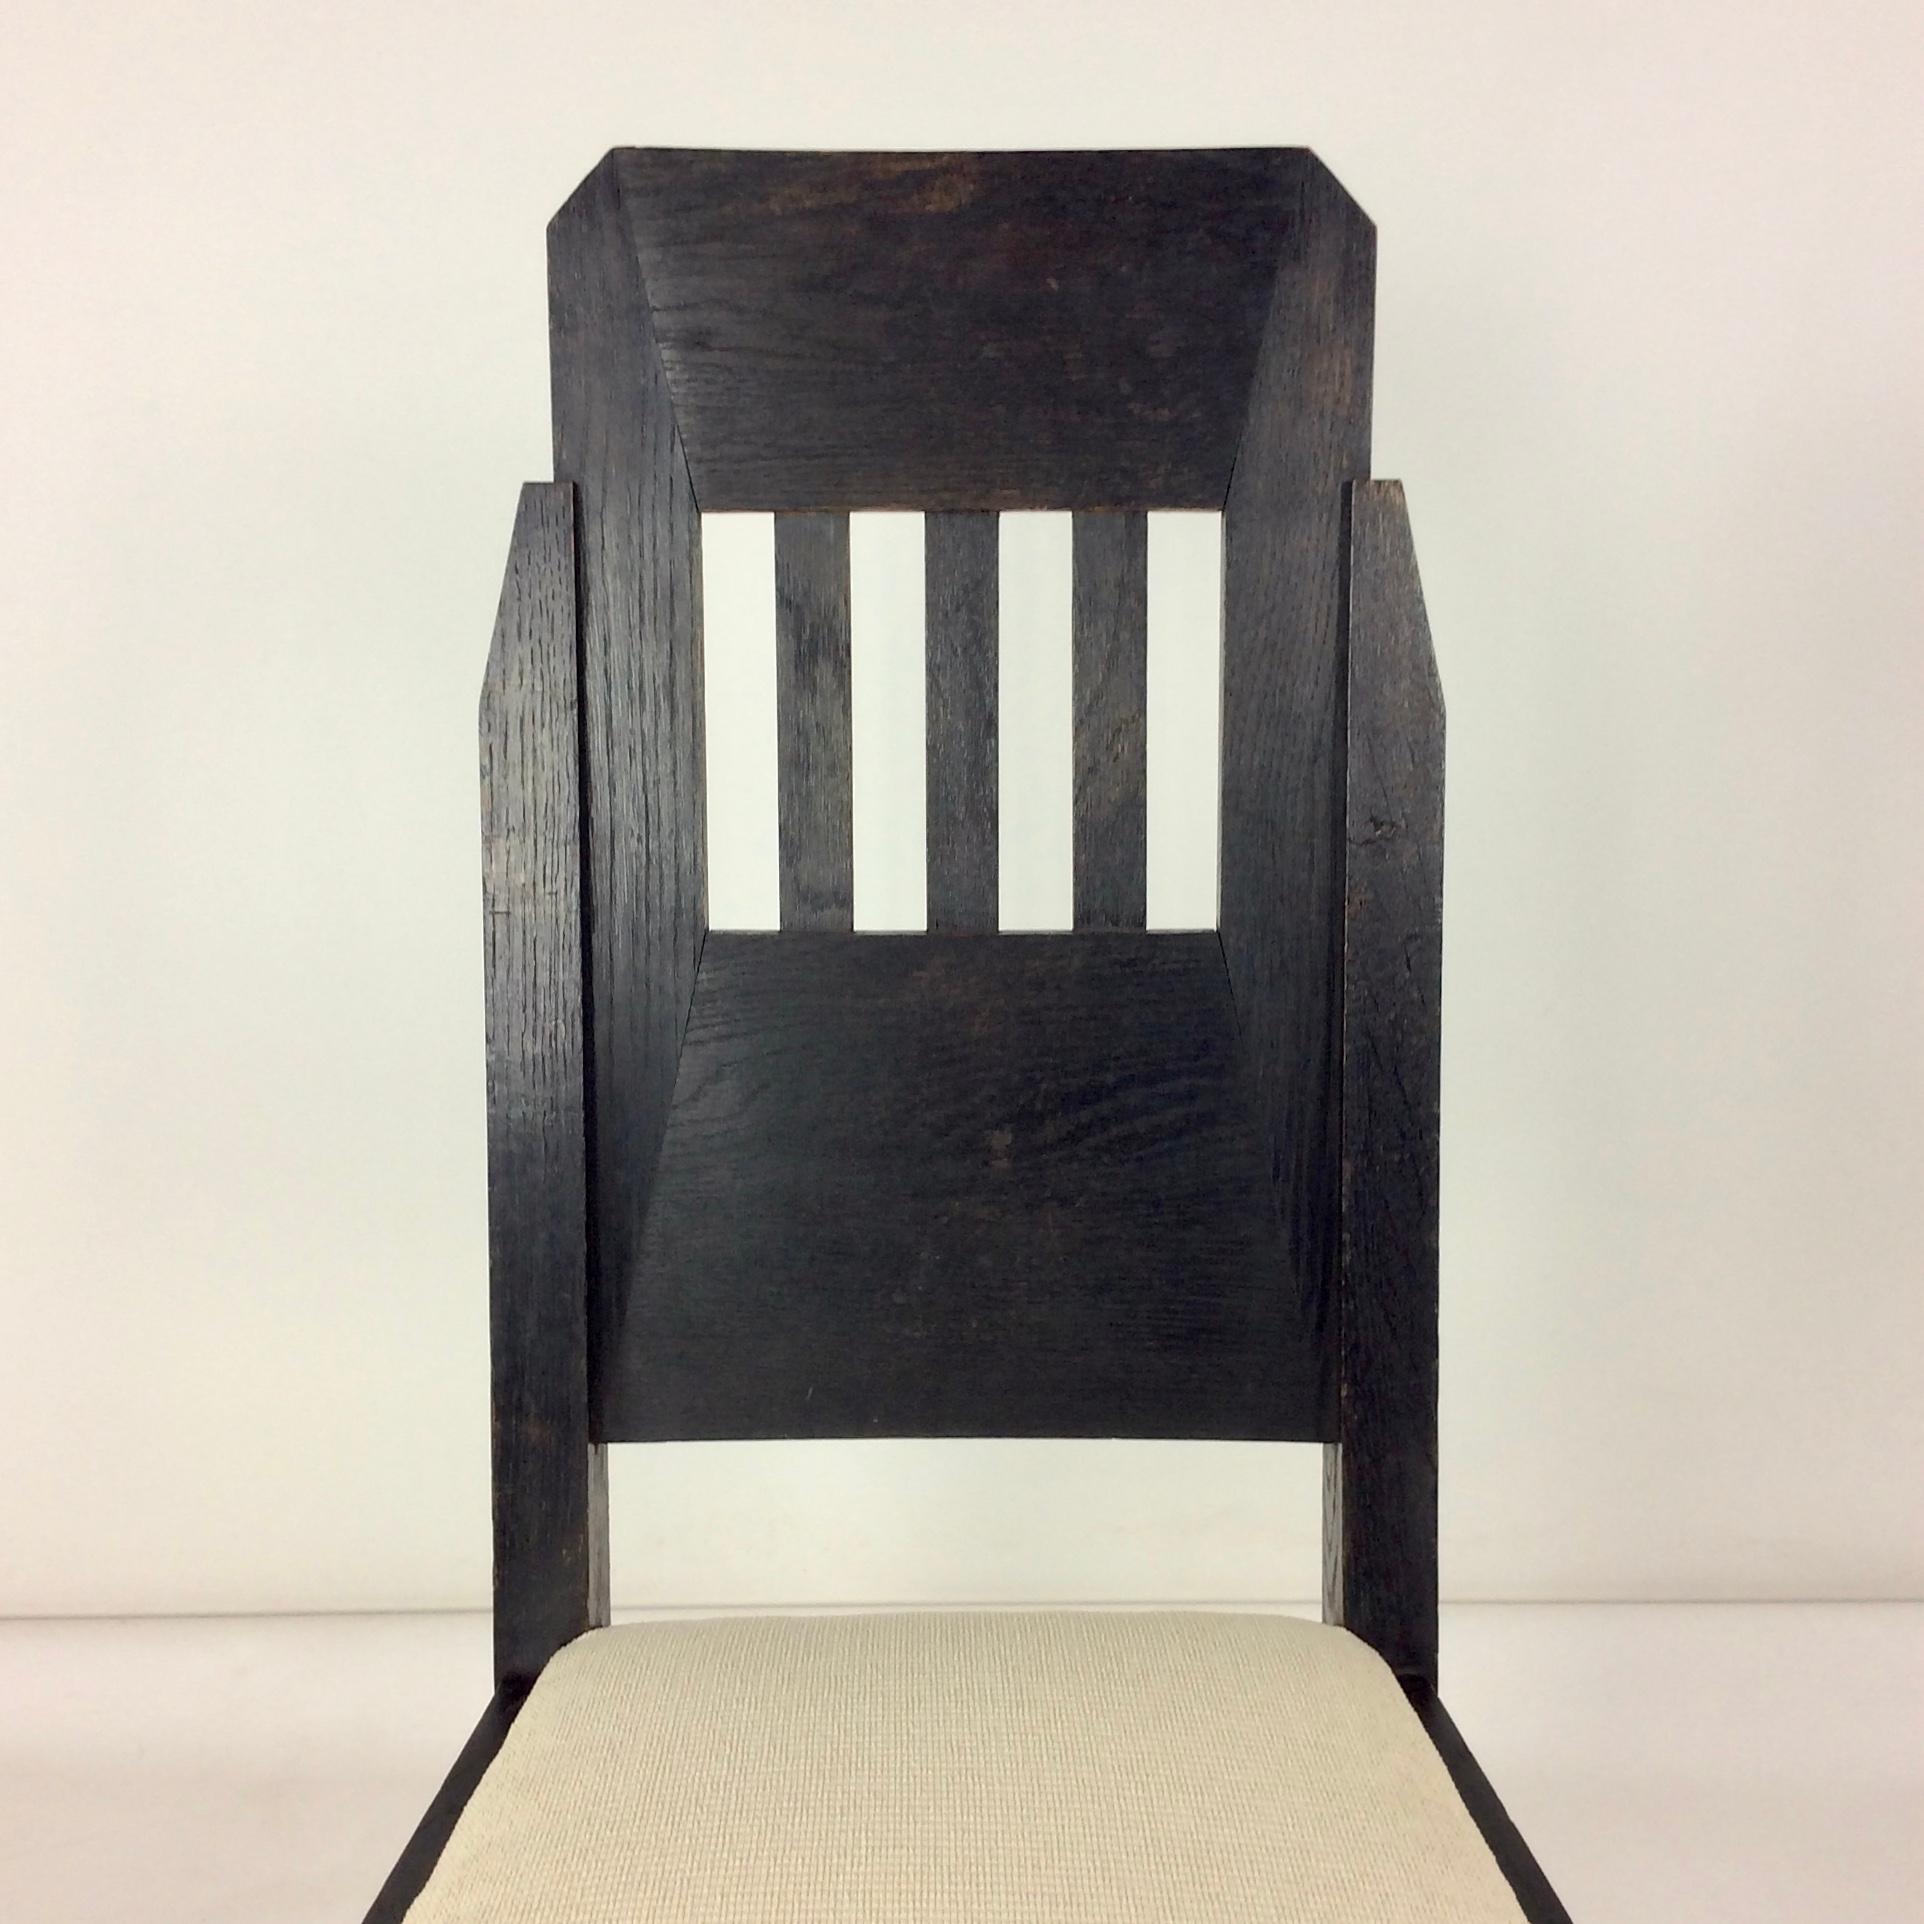 Early 20th Century Marcel-Louis Baugniet Modernist Chair, circa 1925, Belgium For Sale